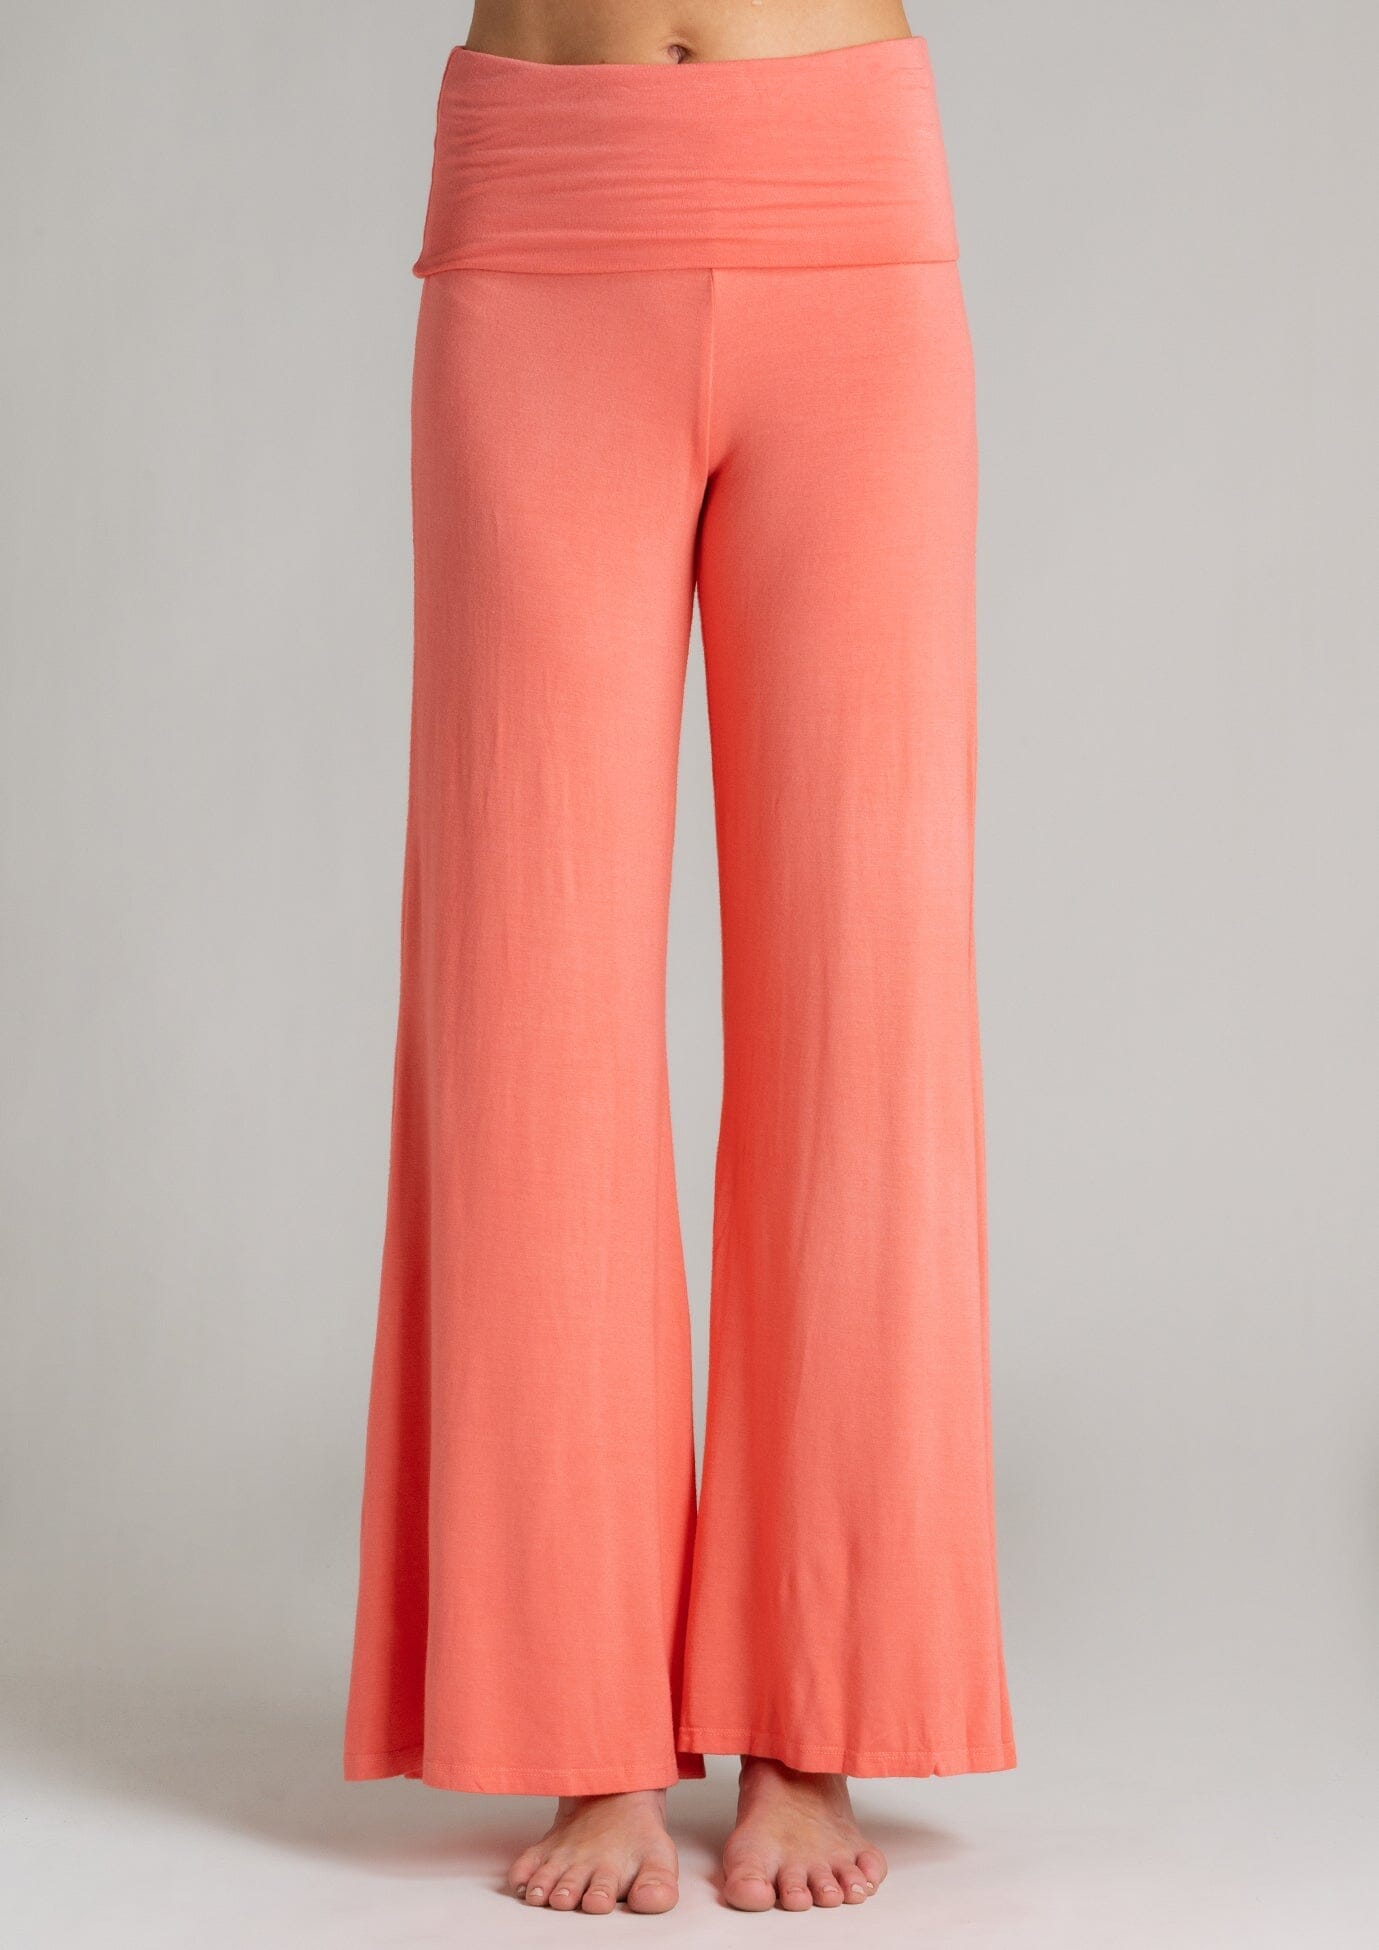 Chill Yoga Pant in Coral by Jala Spring 2023